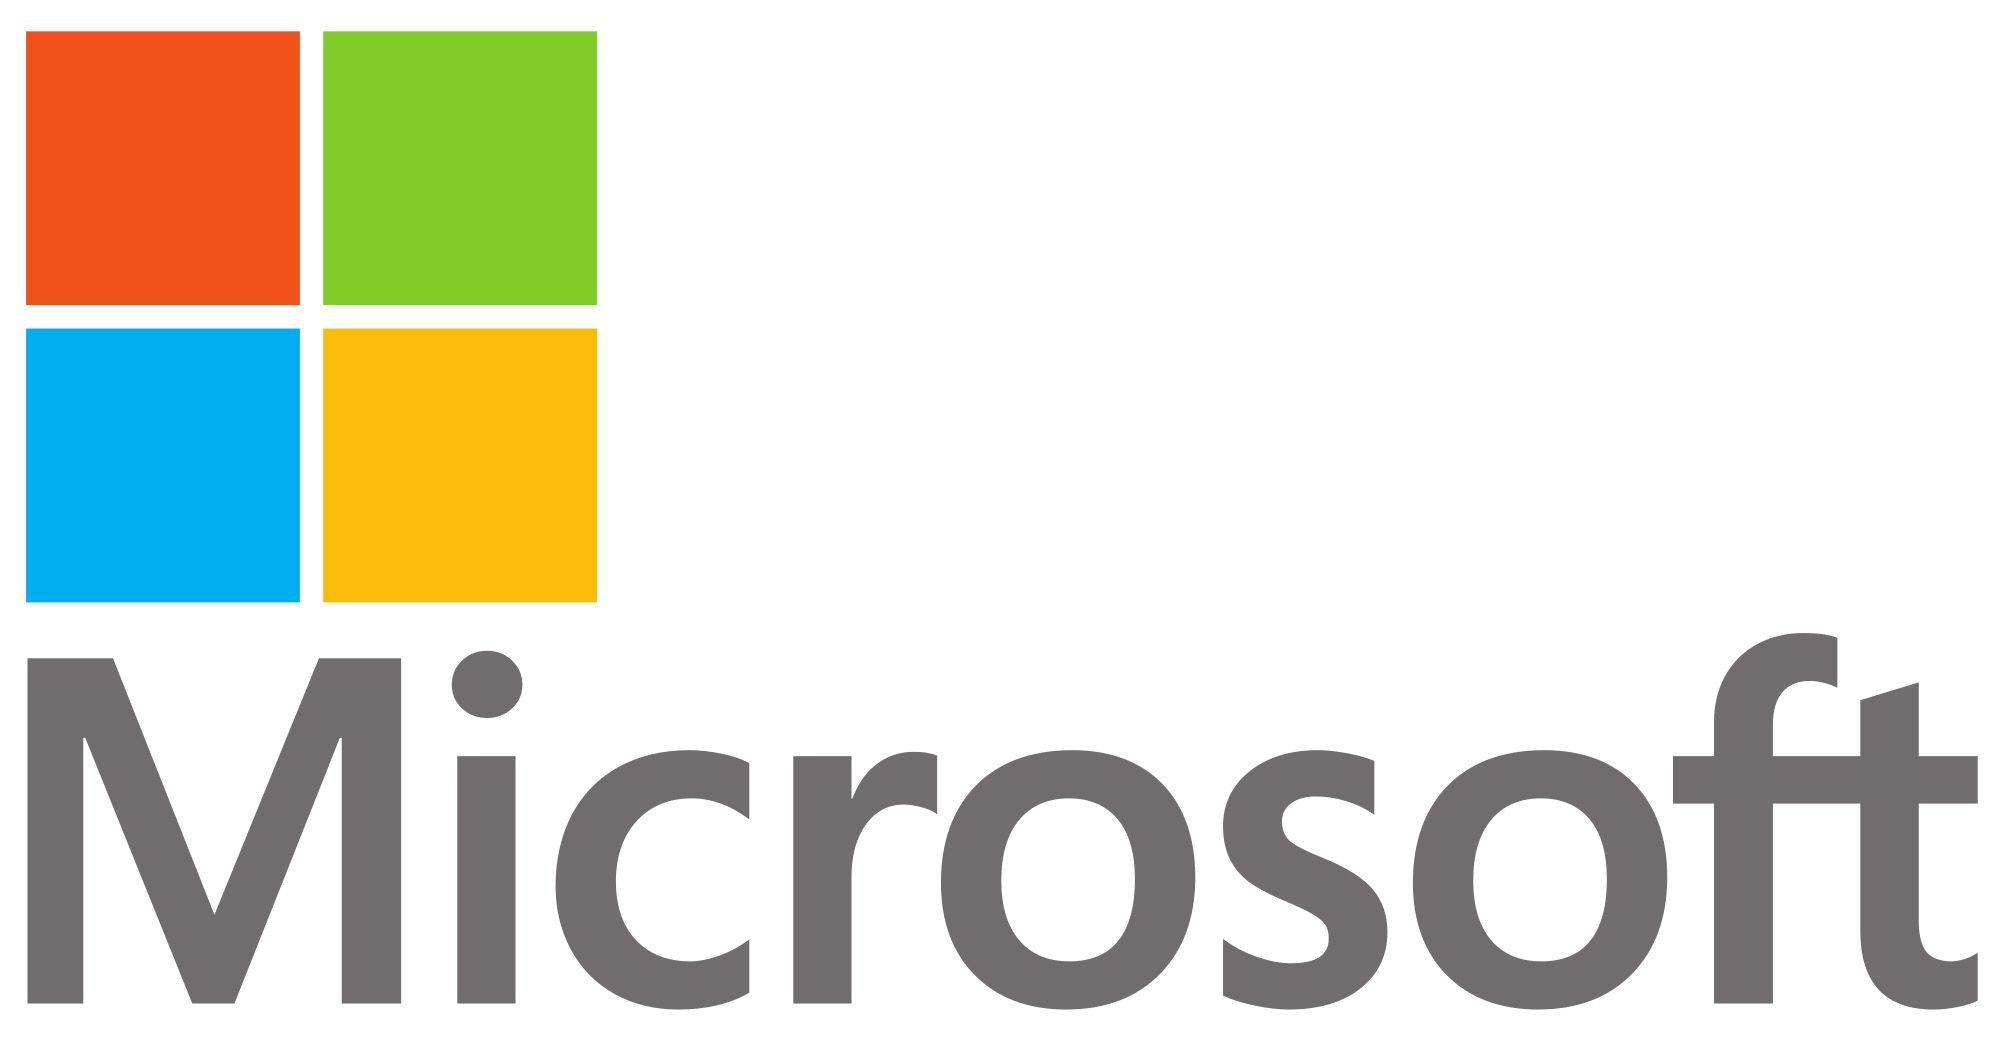 Current Microsoft Logo - Microsoft Logo, Microsoft Symbol, Meaning, History and Evolution